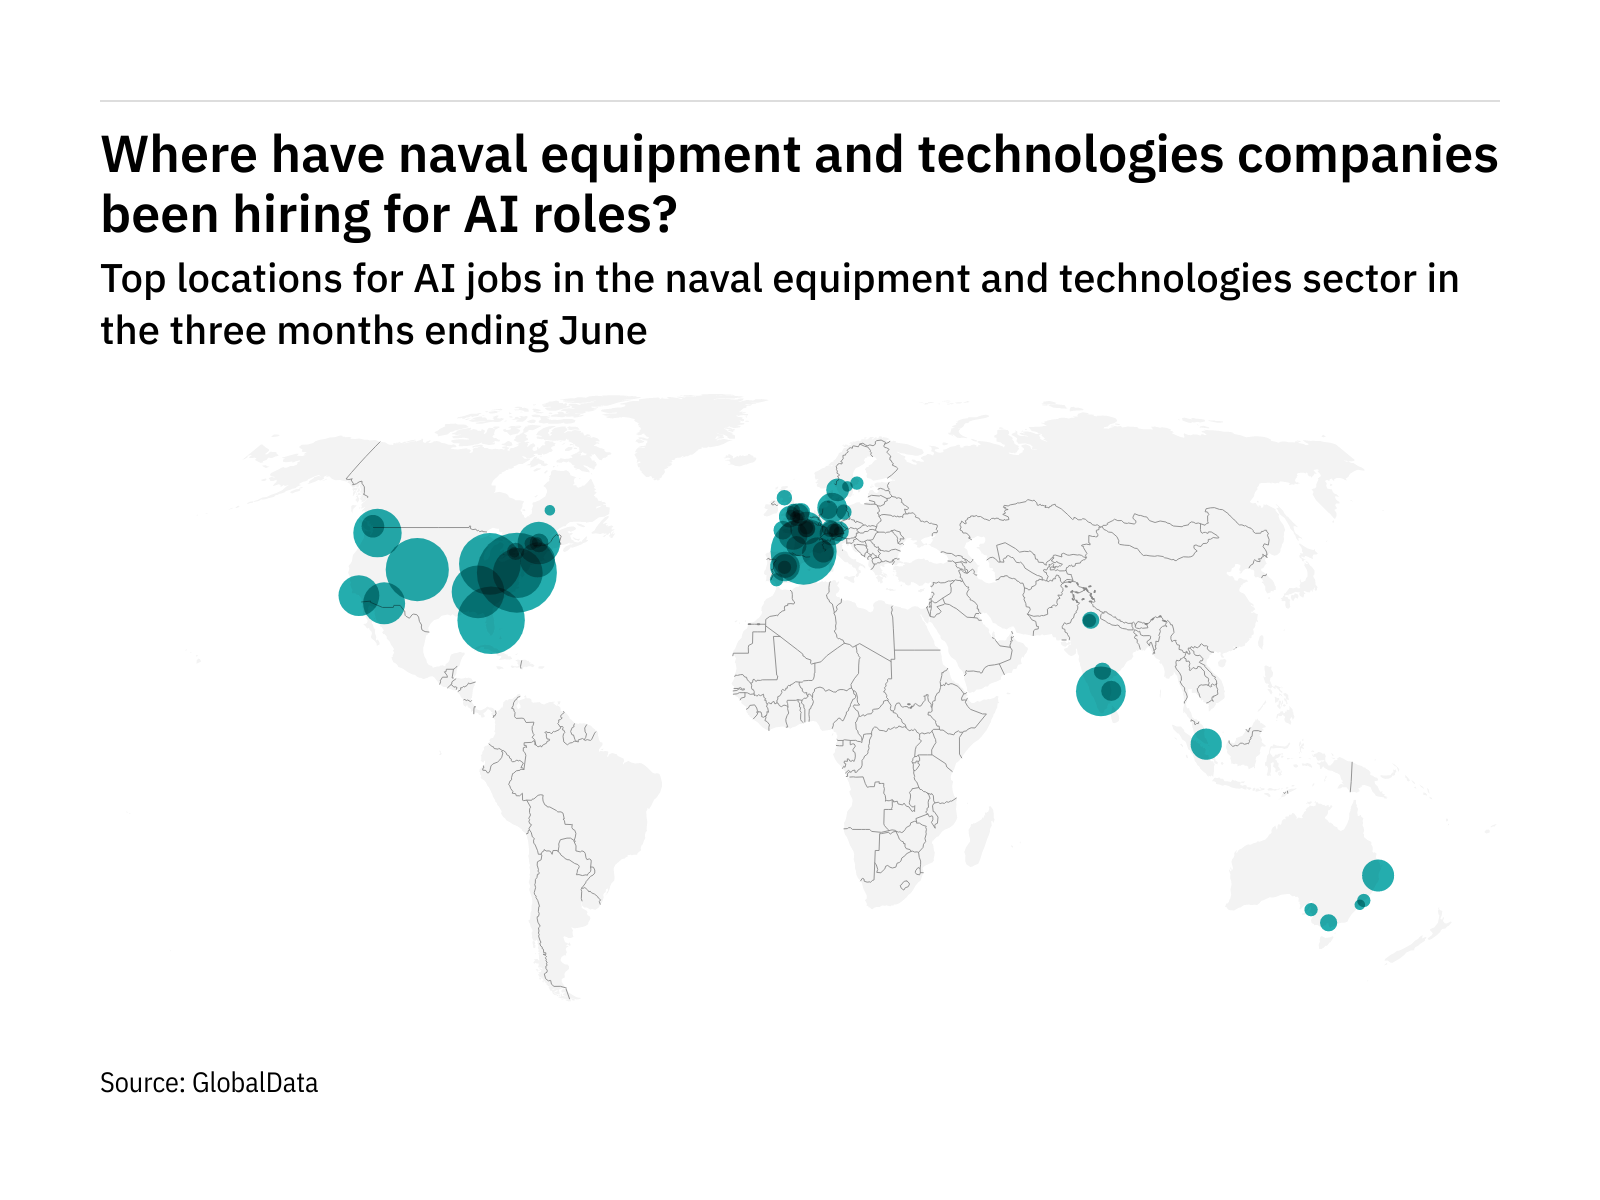 Europe is seeing a hiring boom in naval industry AI roles